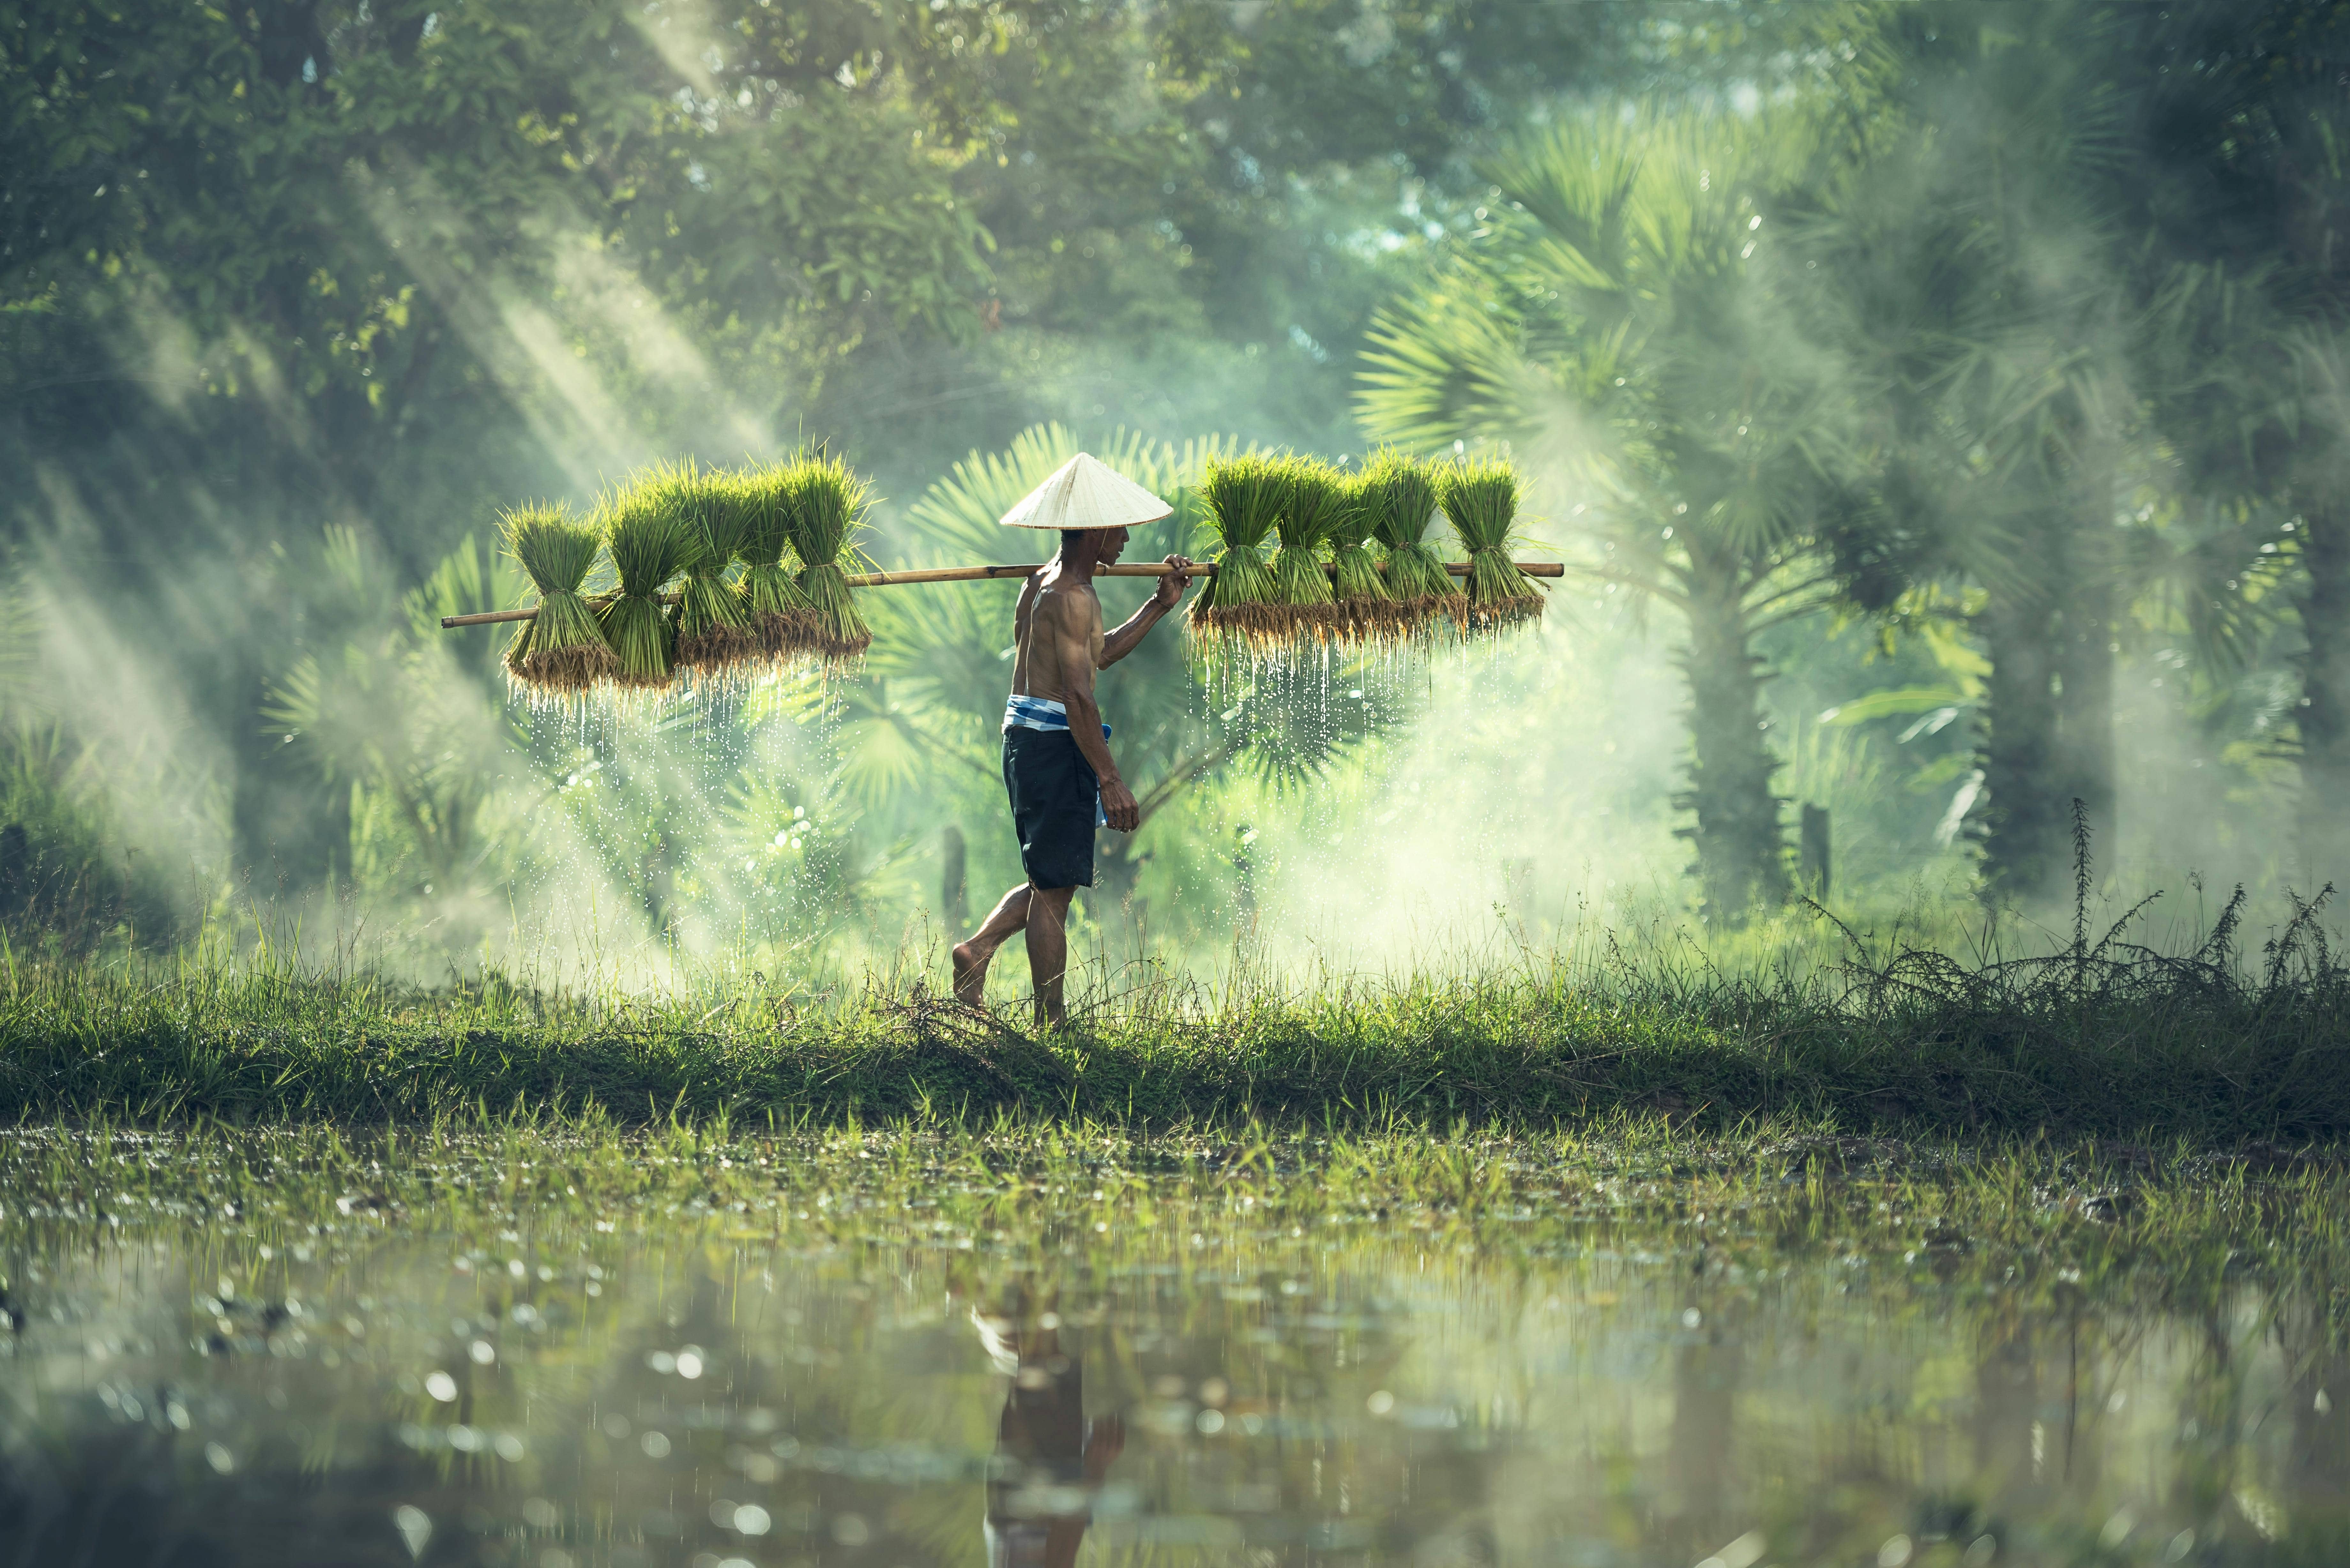 Witness the simplicity and tranquility of life in Asia as a man walks through a farm carrying green grass. Embrace the rural charm with DREW TRAVEL.